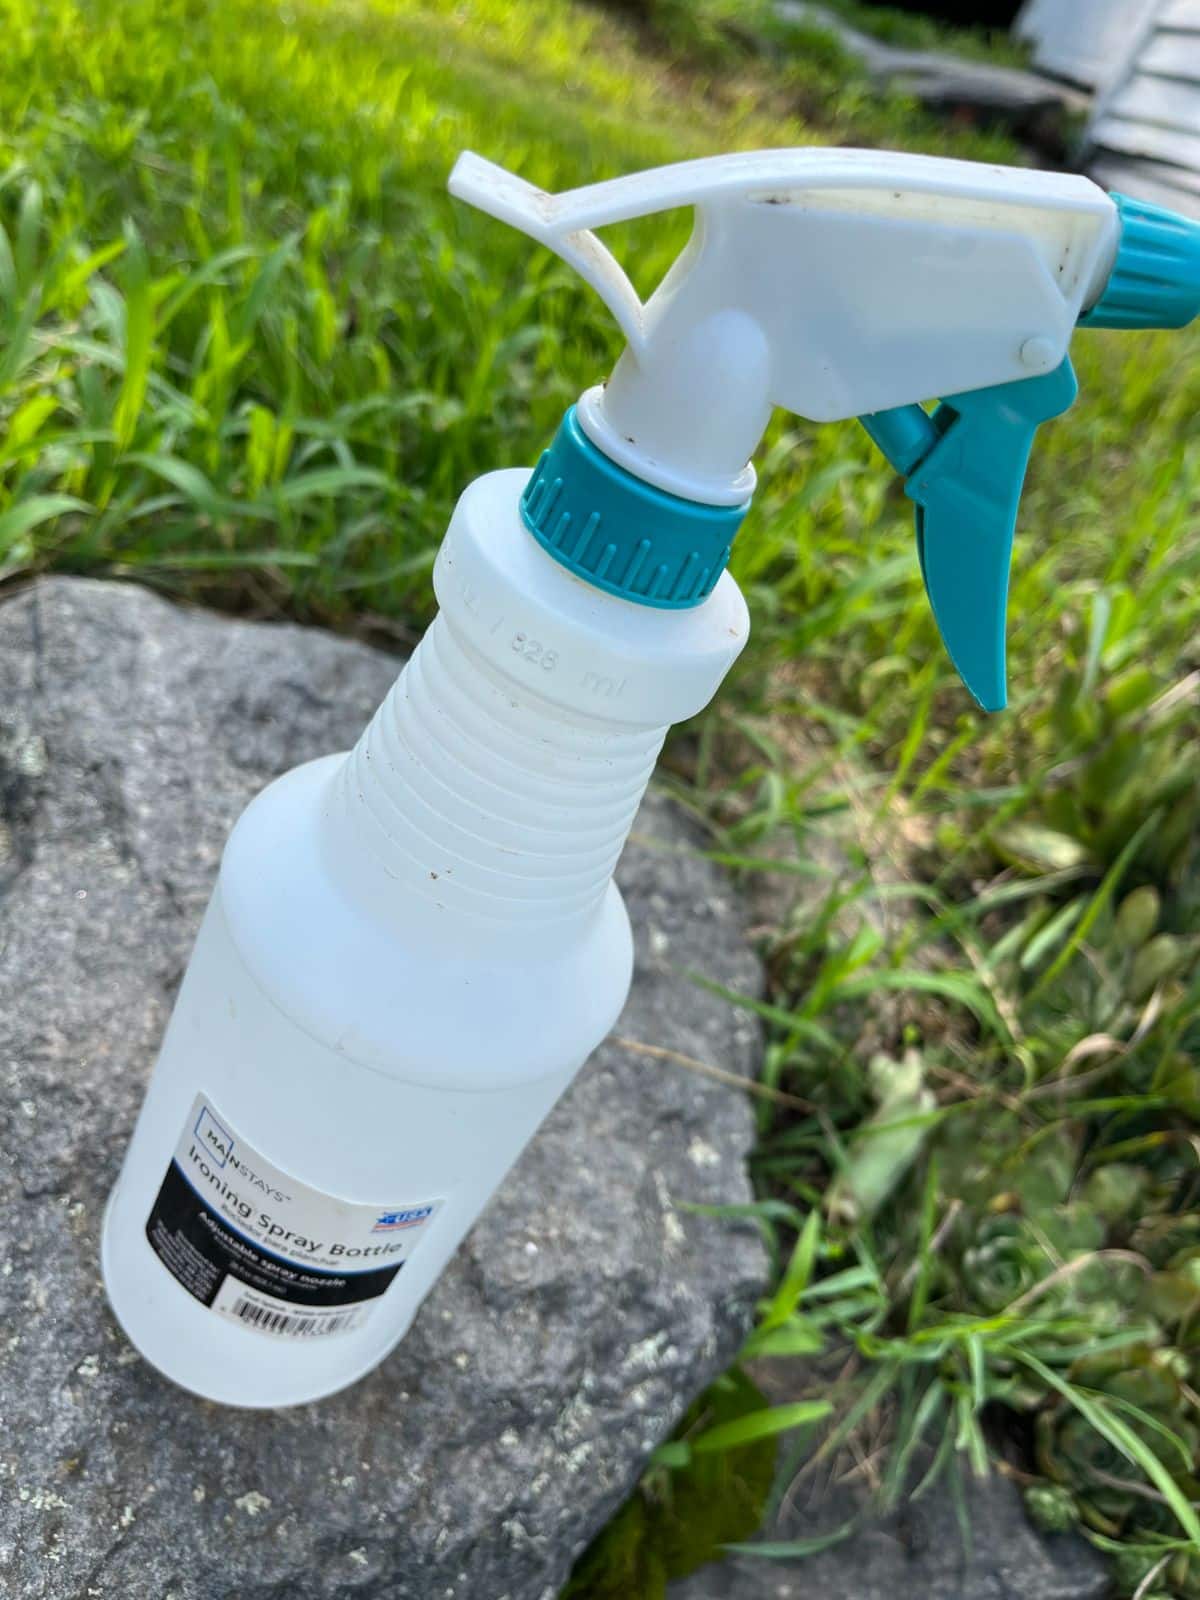 A small spray bottle for spot treating in the garden